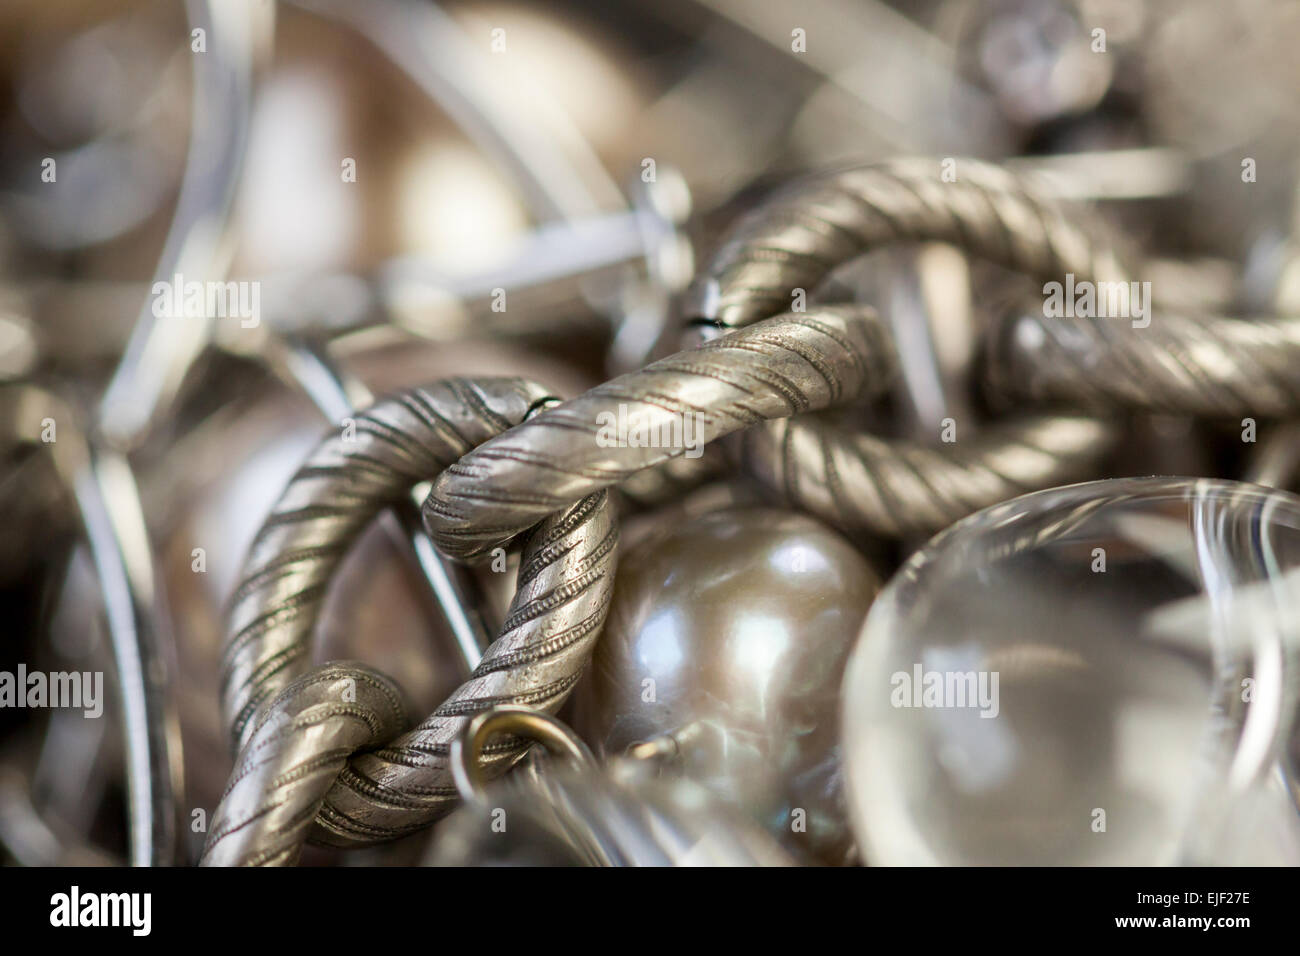 Assorted silver costume jewellery with a jumbled pile of chains with different shaped links, a clear crystal bead and a necklace Stock Photo